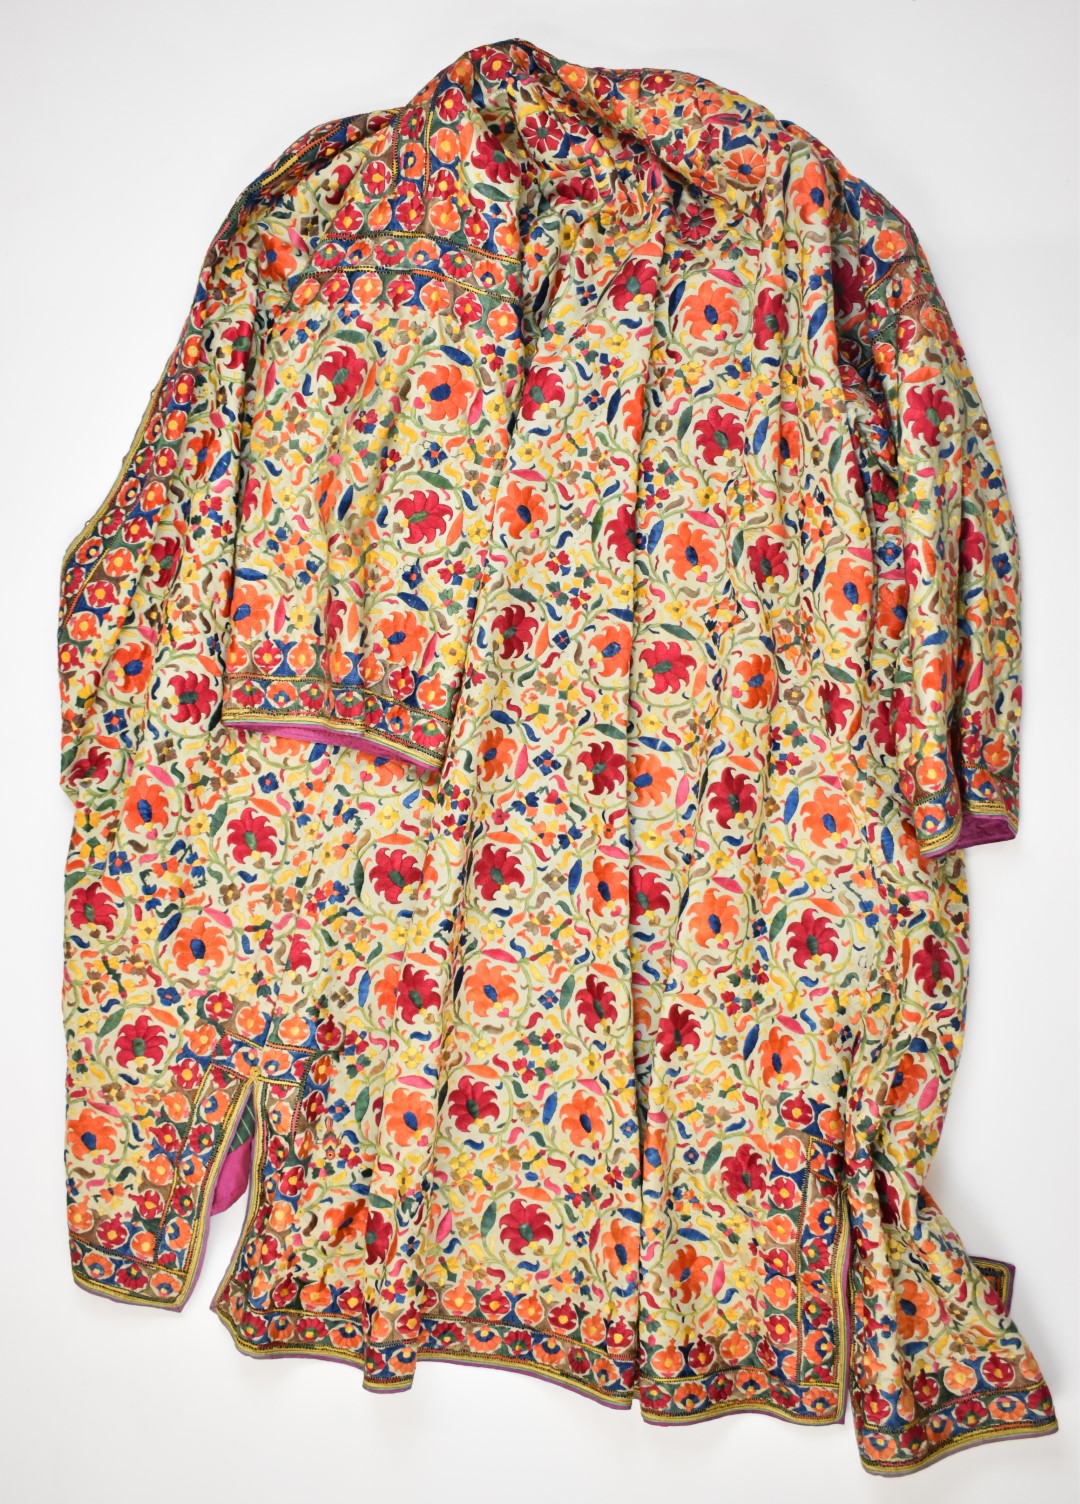 19th / 20thC Indian embroidered coat or coat dress, with a note stating the coat was gifted in the - Image 5 of 5